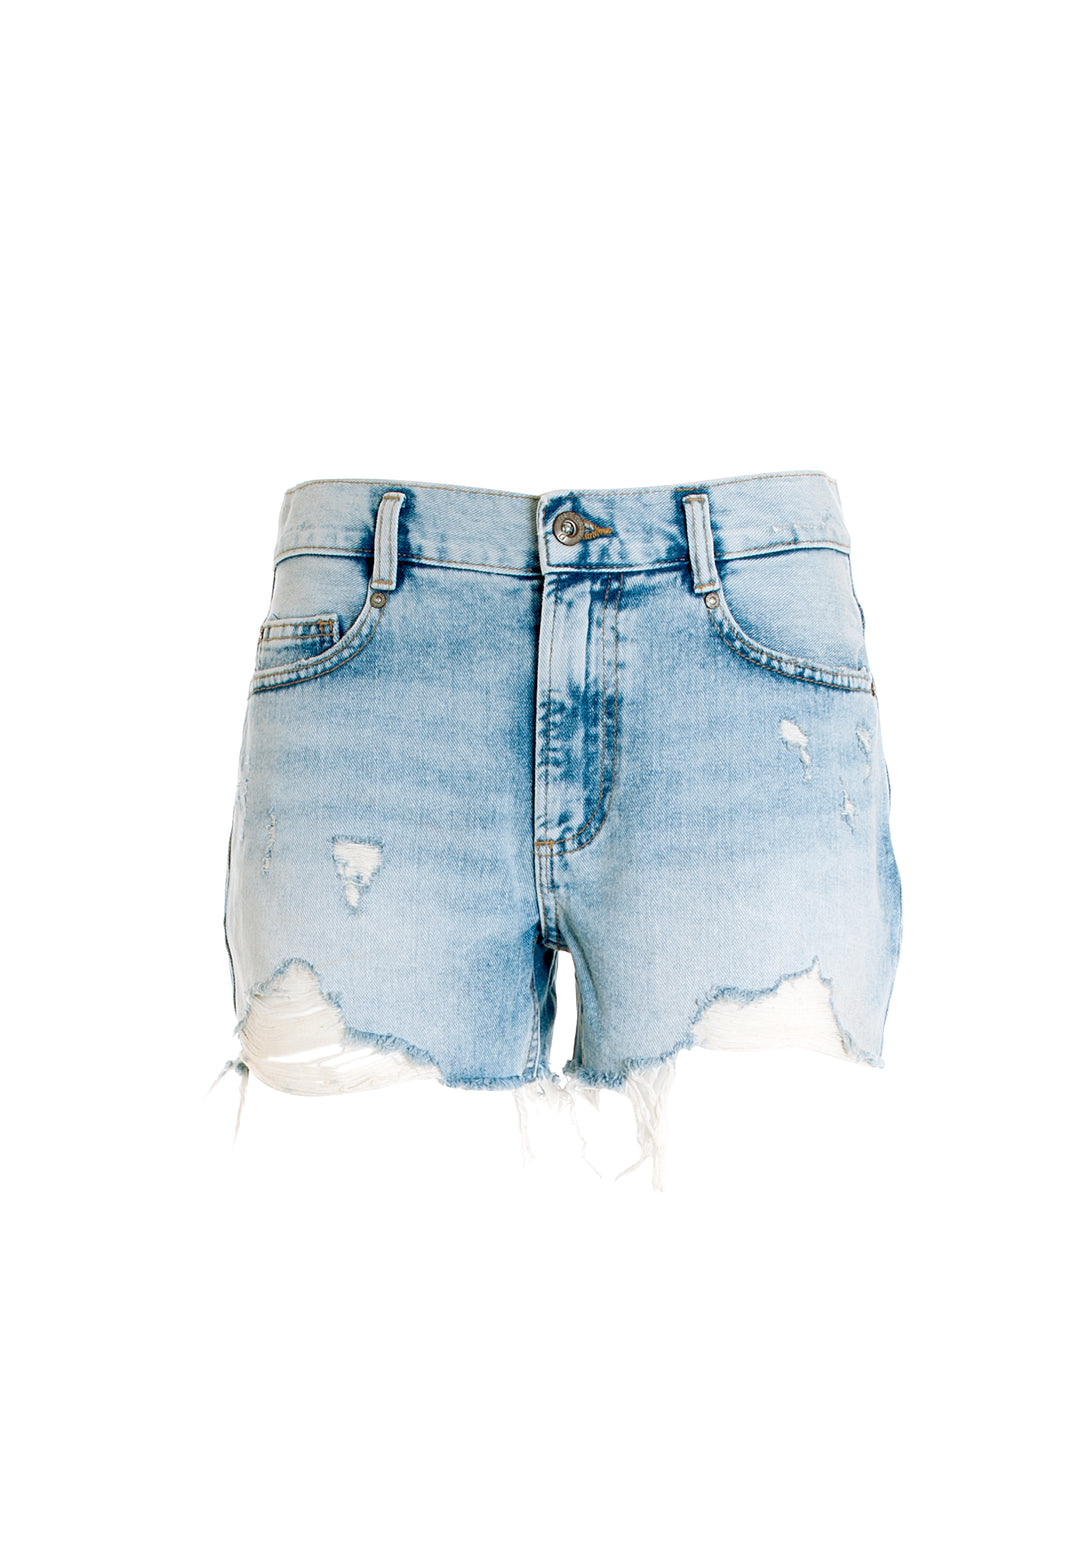 Short pant regular fit made in denim with bleached wash